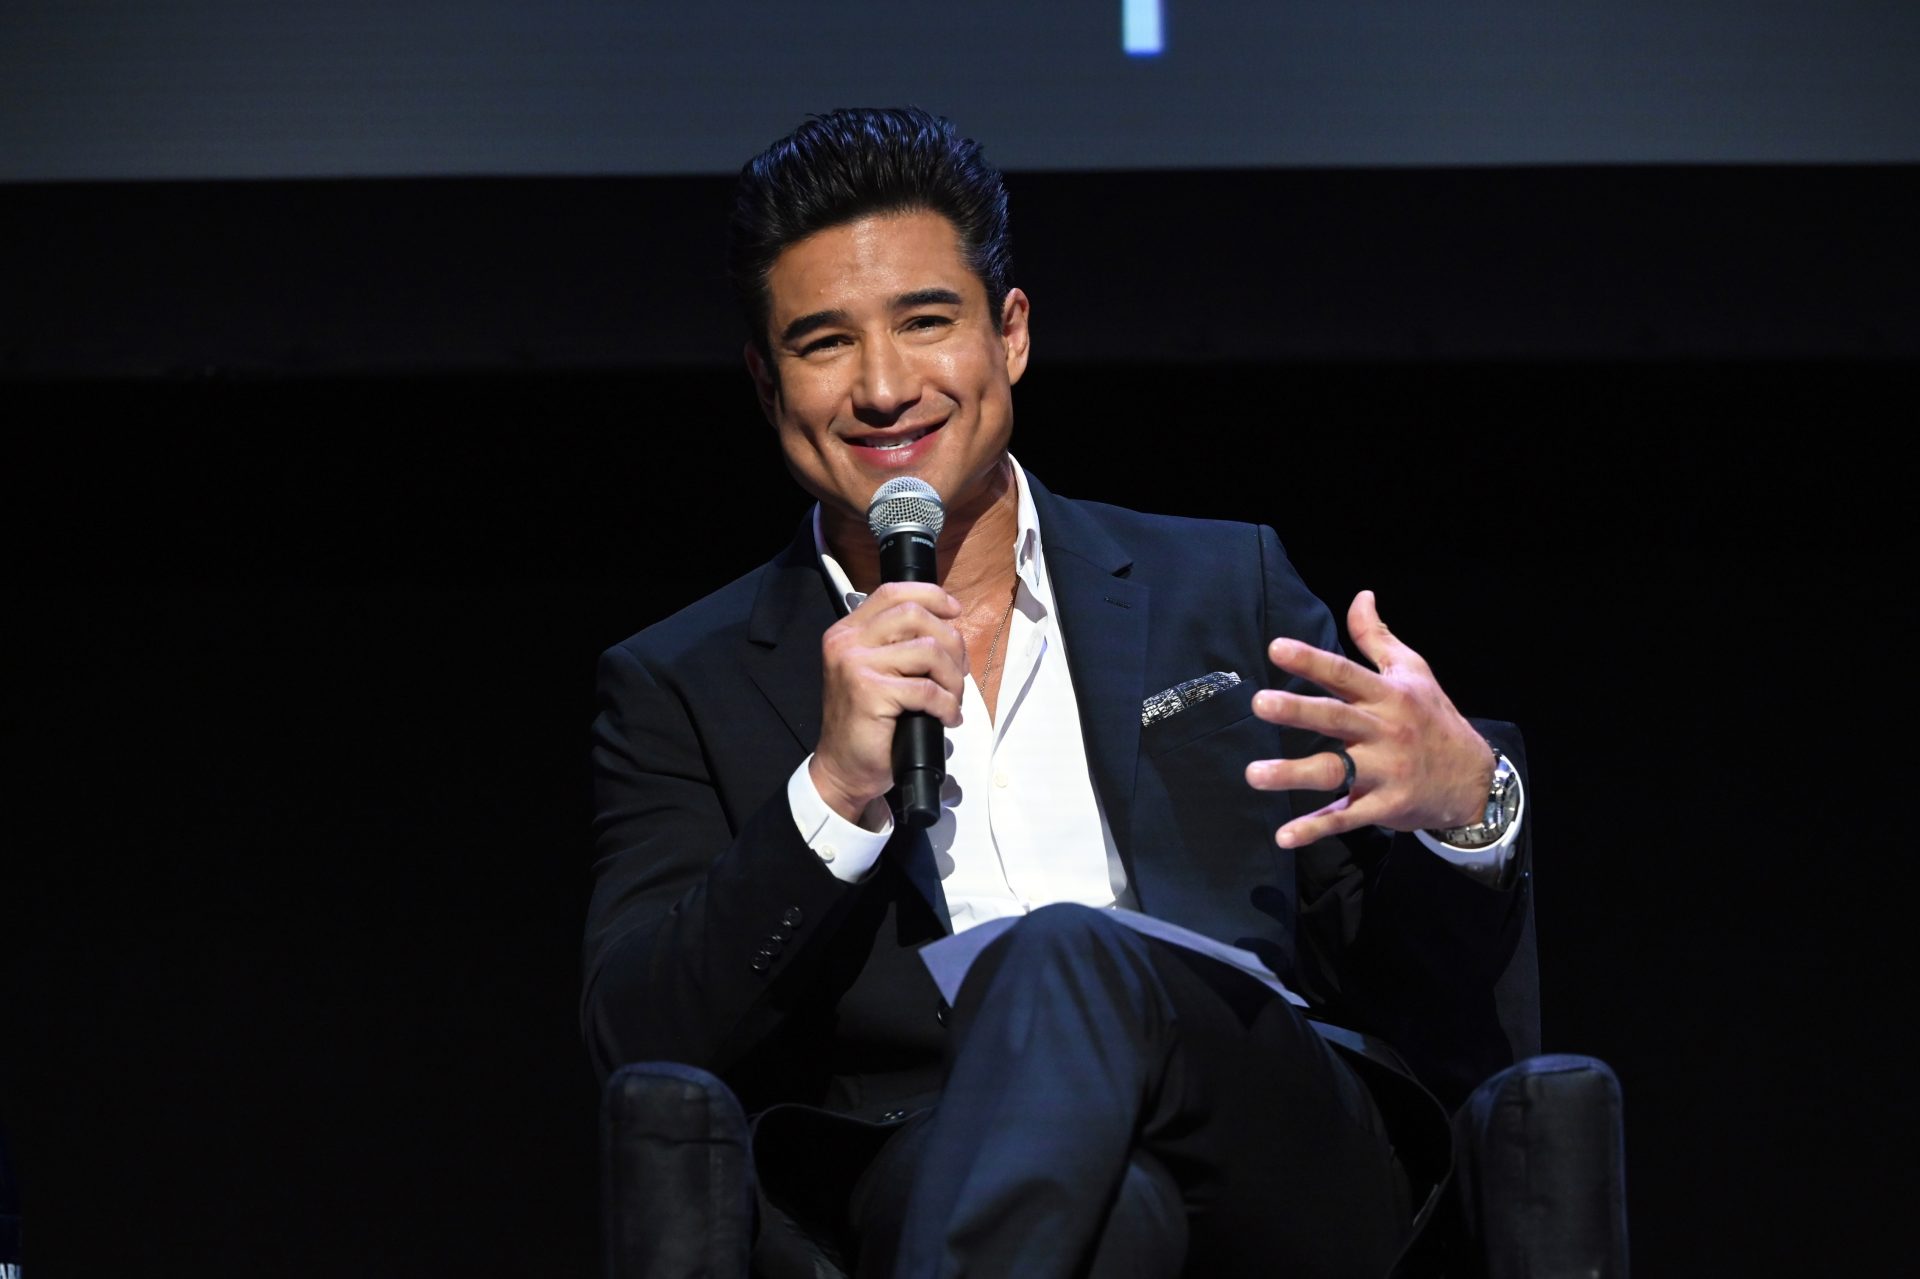 Mario Lopez Addresses Code-Switching After Trending Online